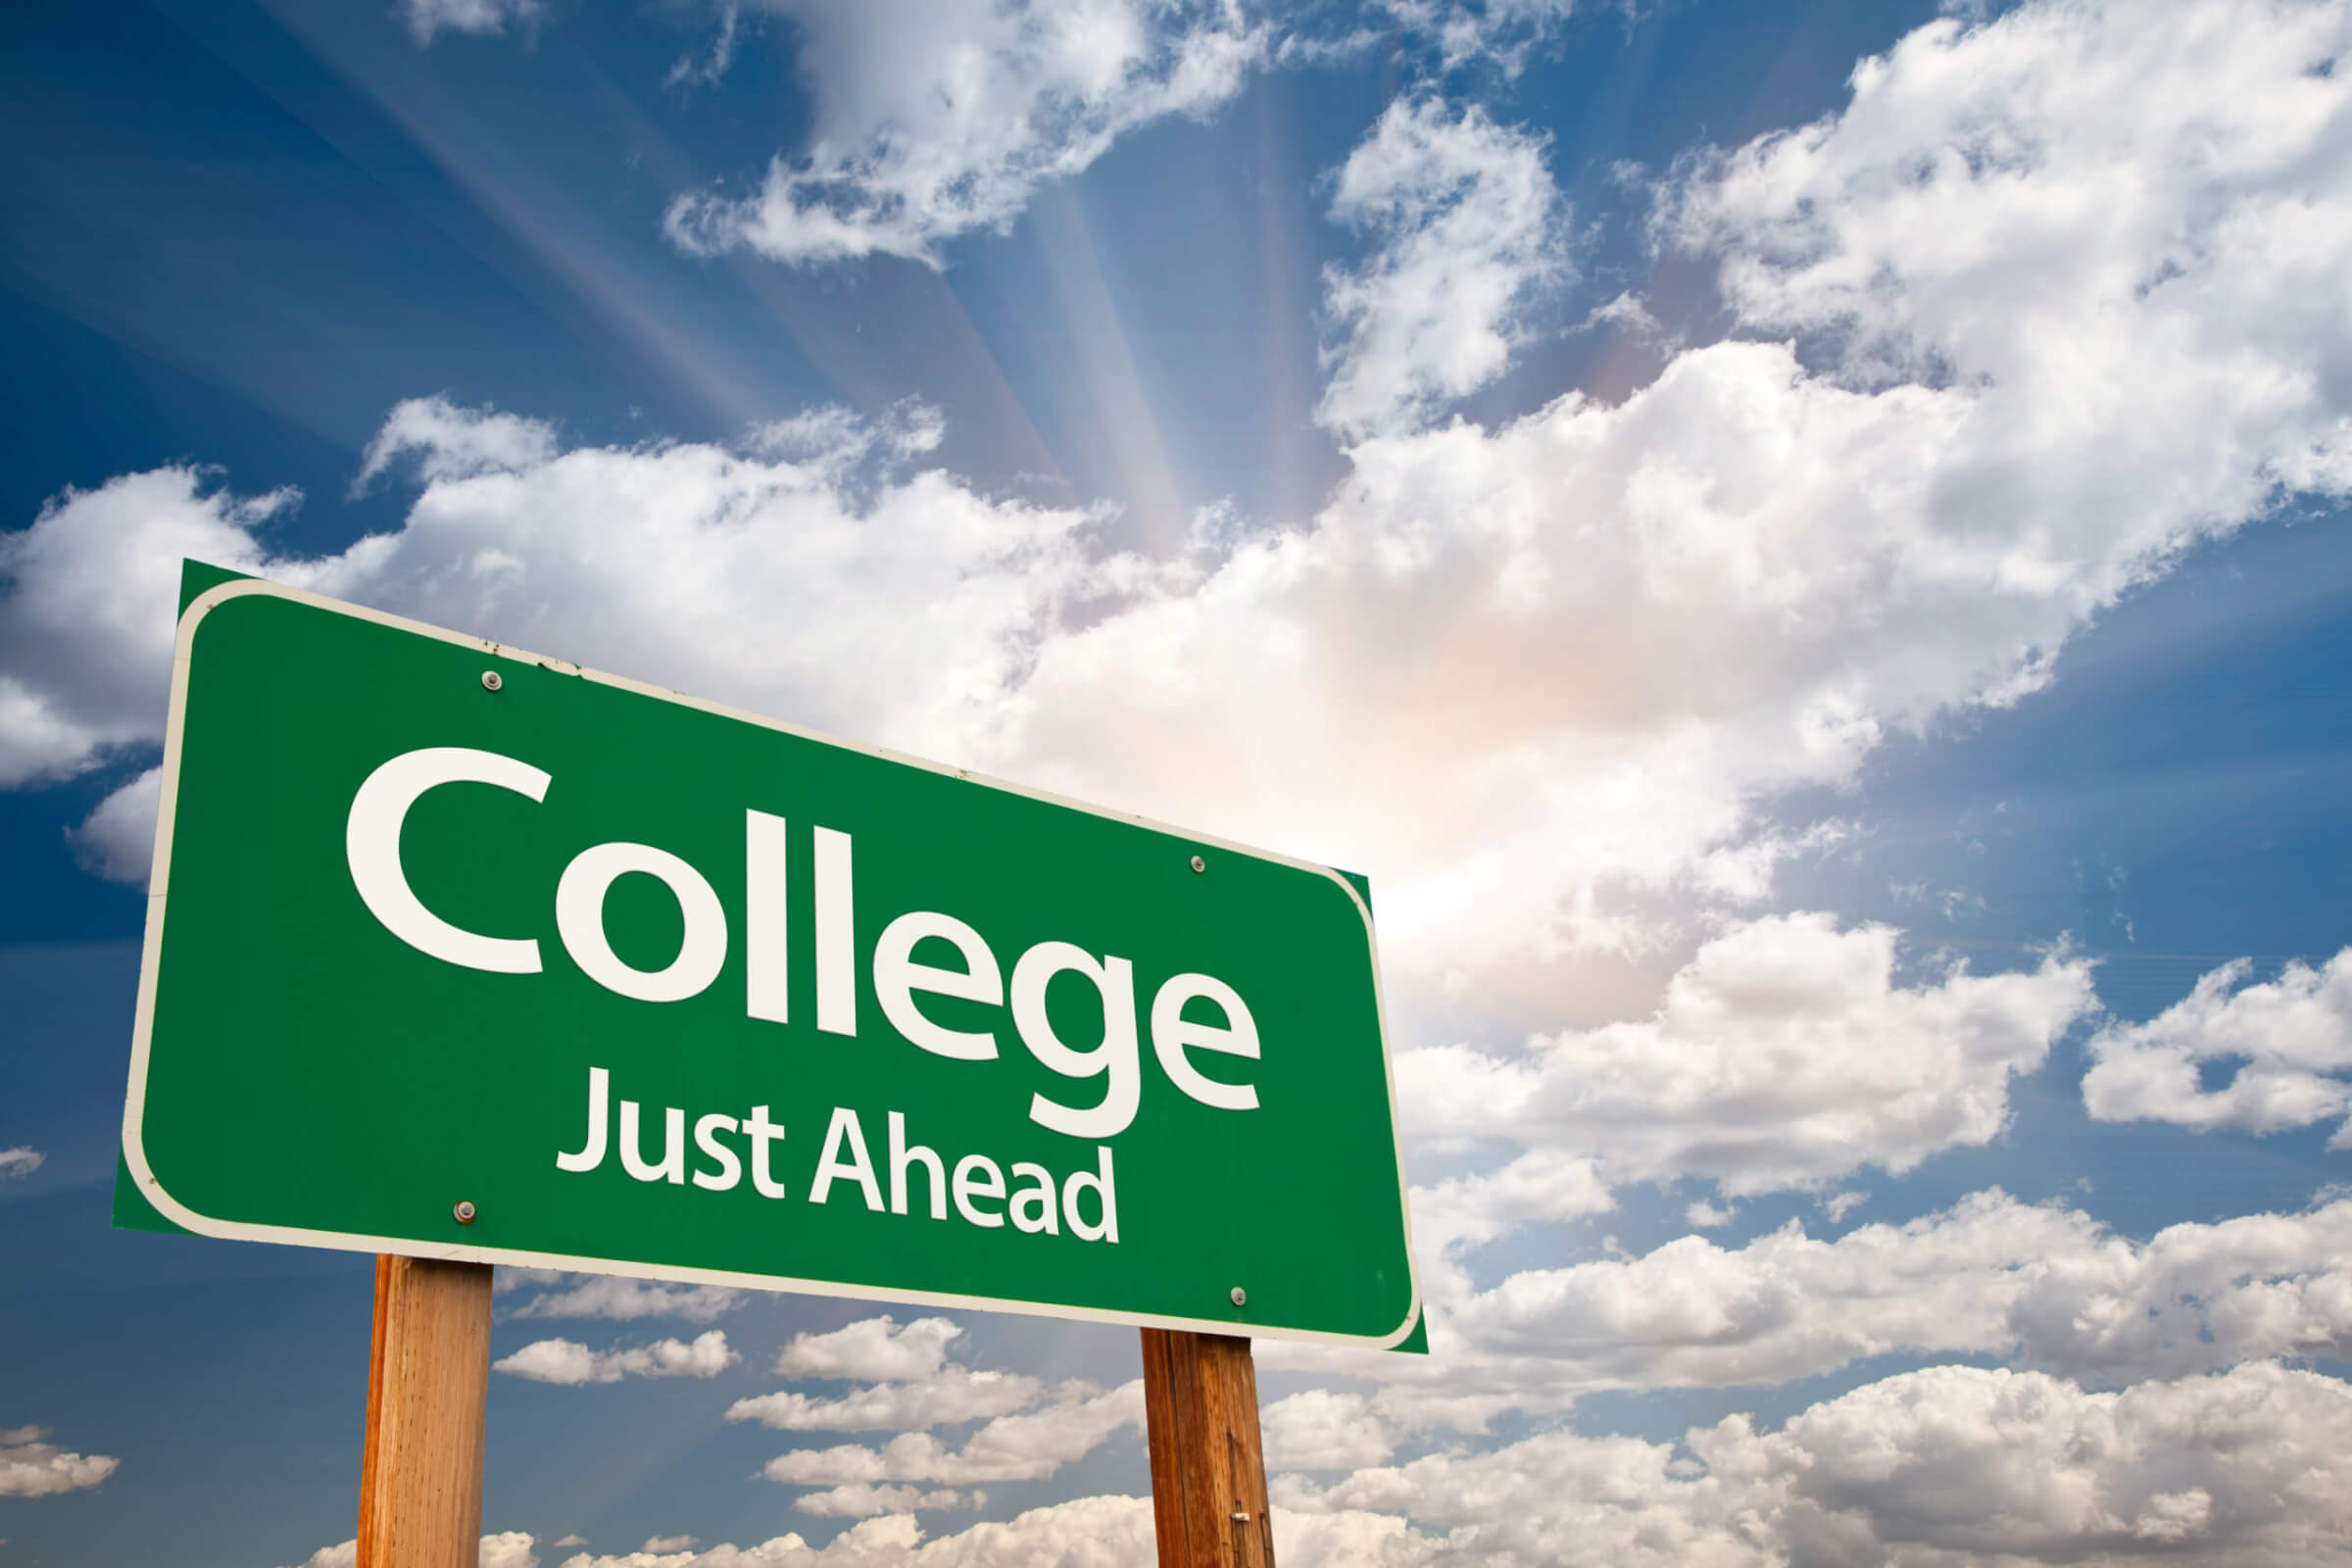 College Just Ahead sign